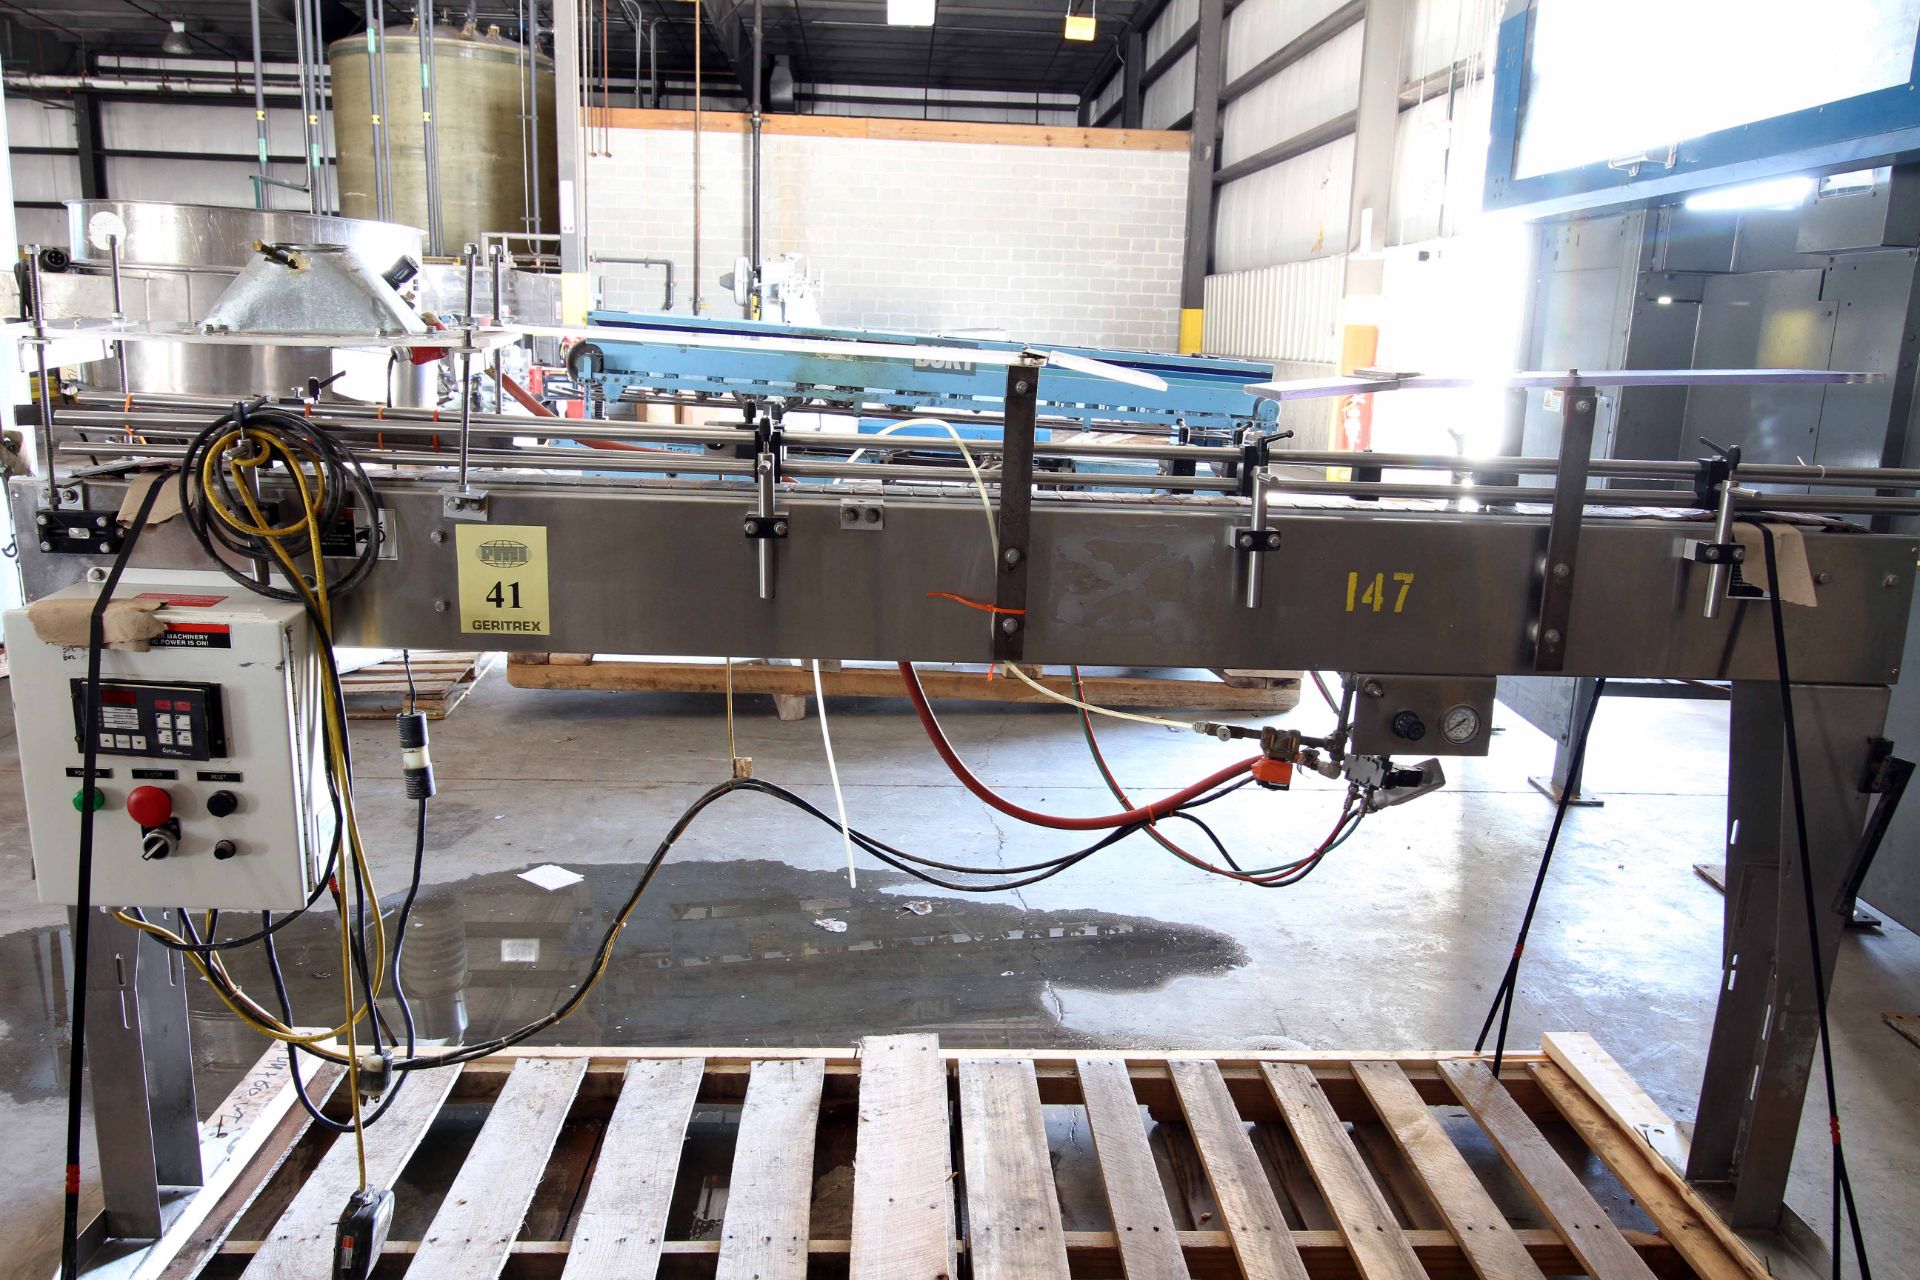 CONVEYOR, ALLFILL 8', new 2003, stainless steel, guardrails, Plexiglas top, 3.25 poly table top